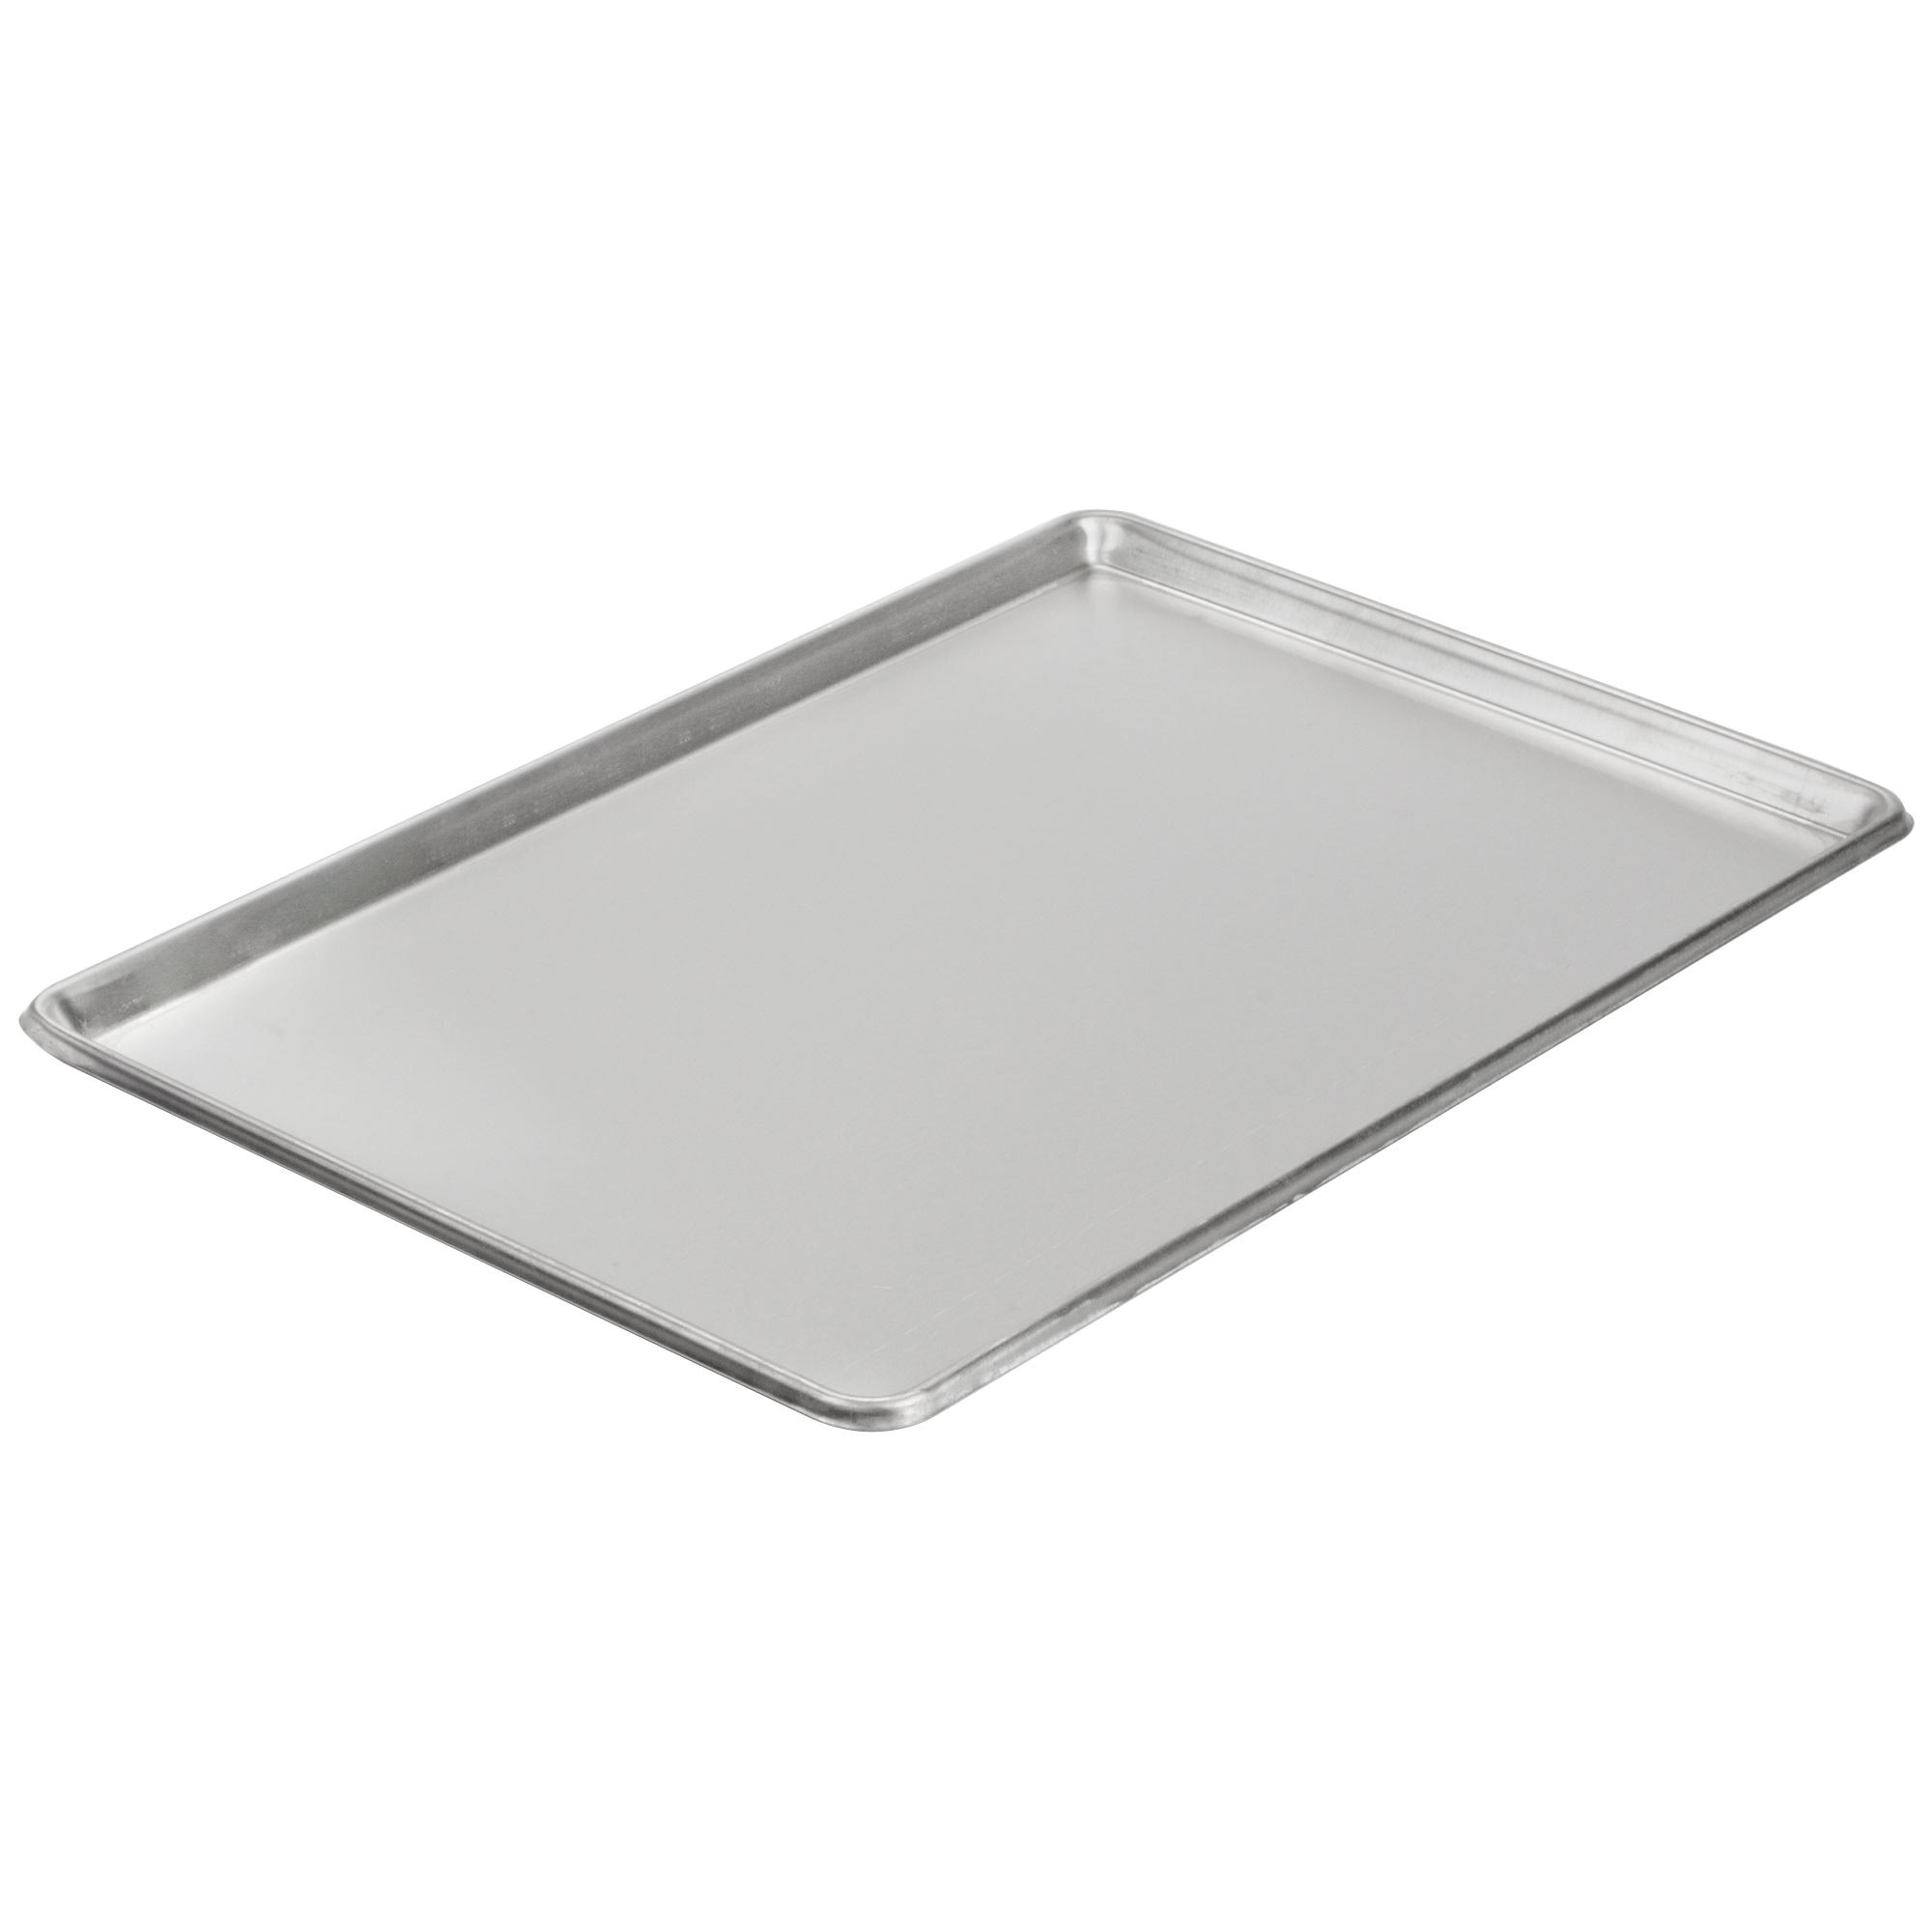 SHEET PAN FULL SIZE, Magic Special Events